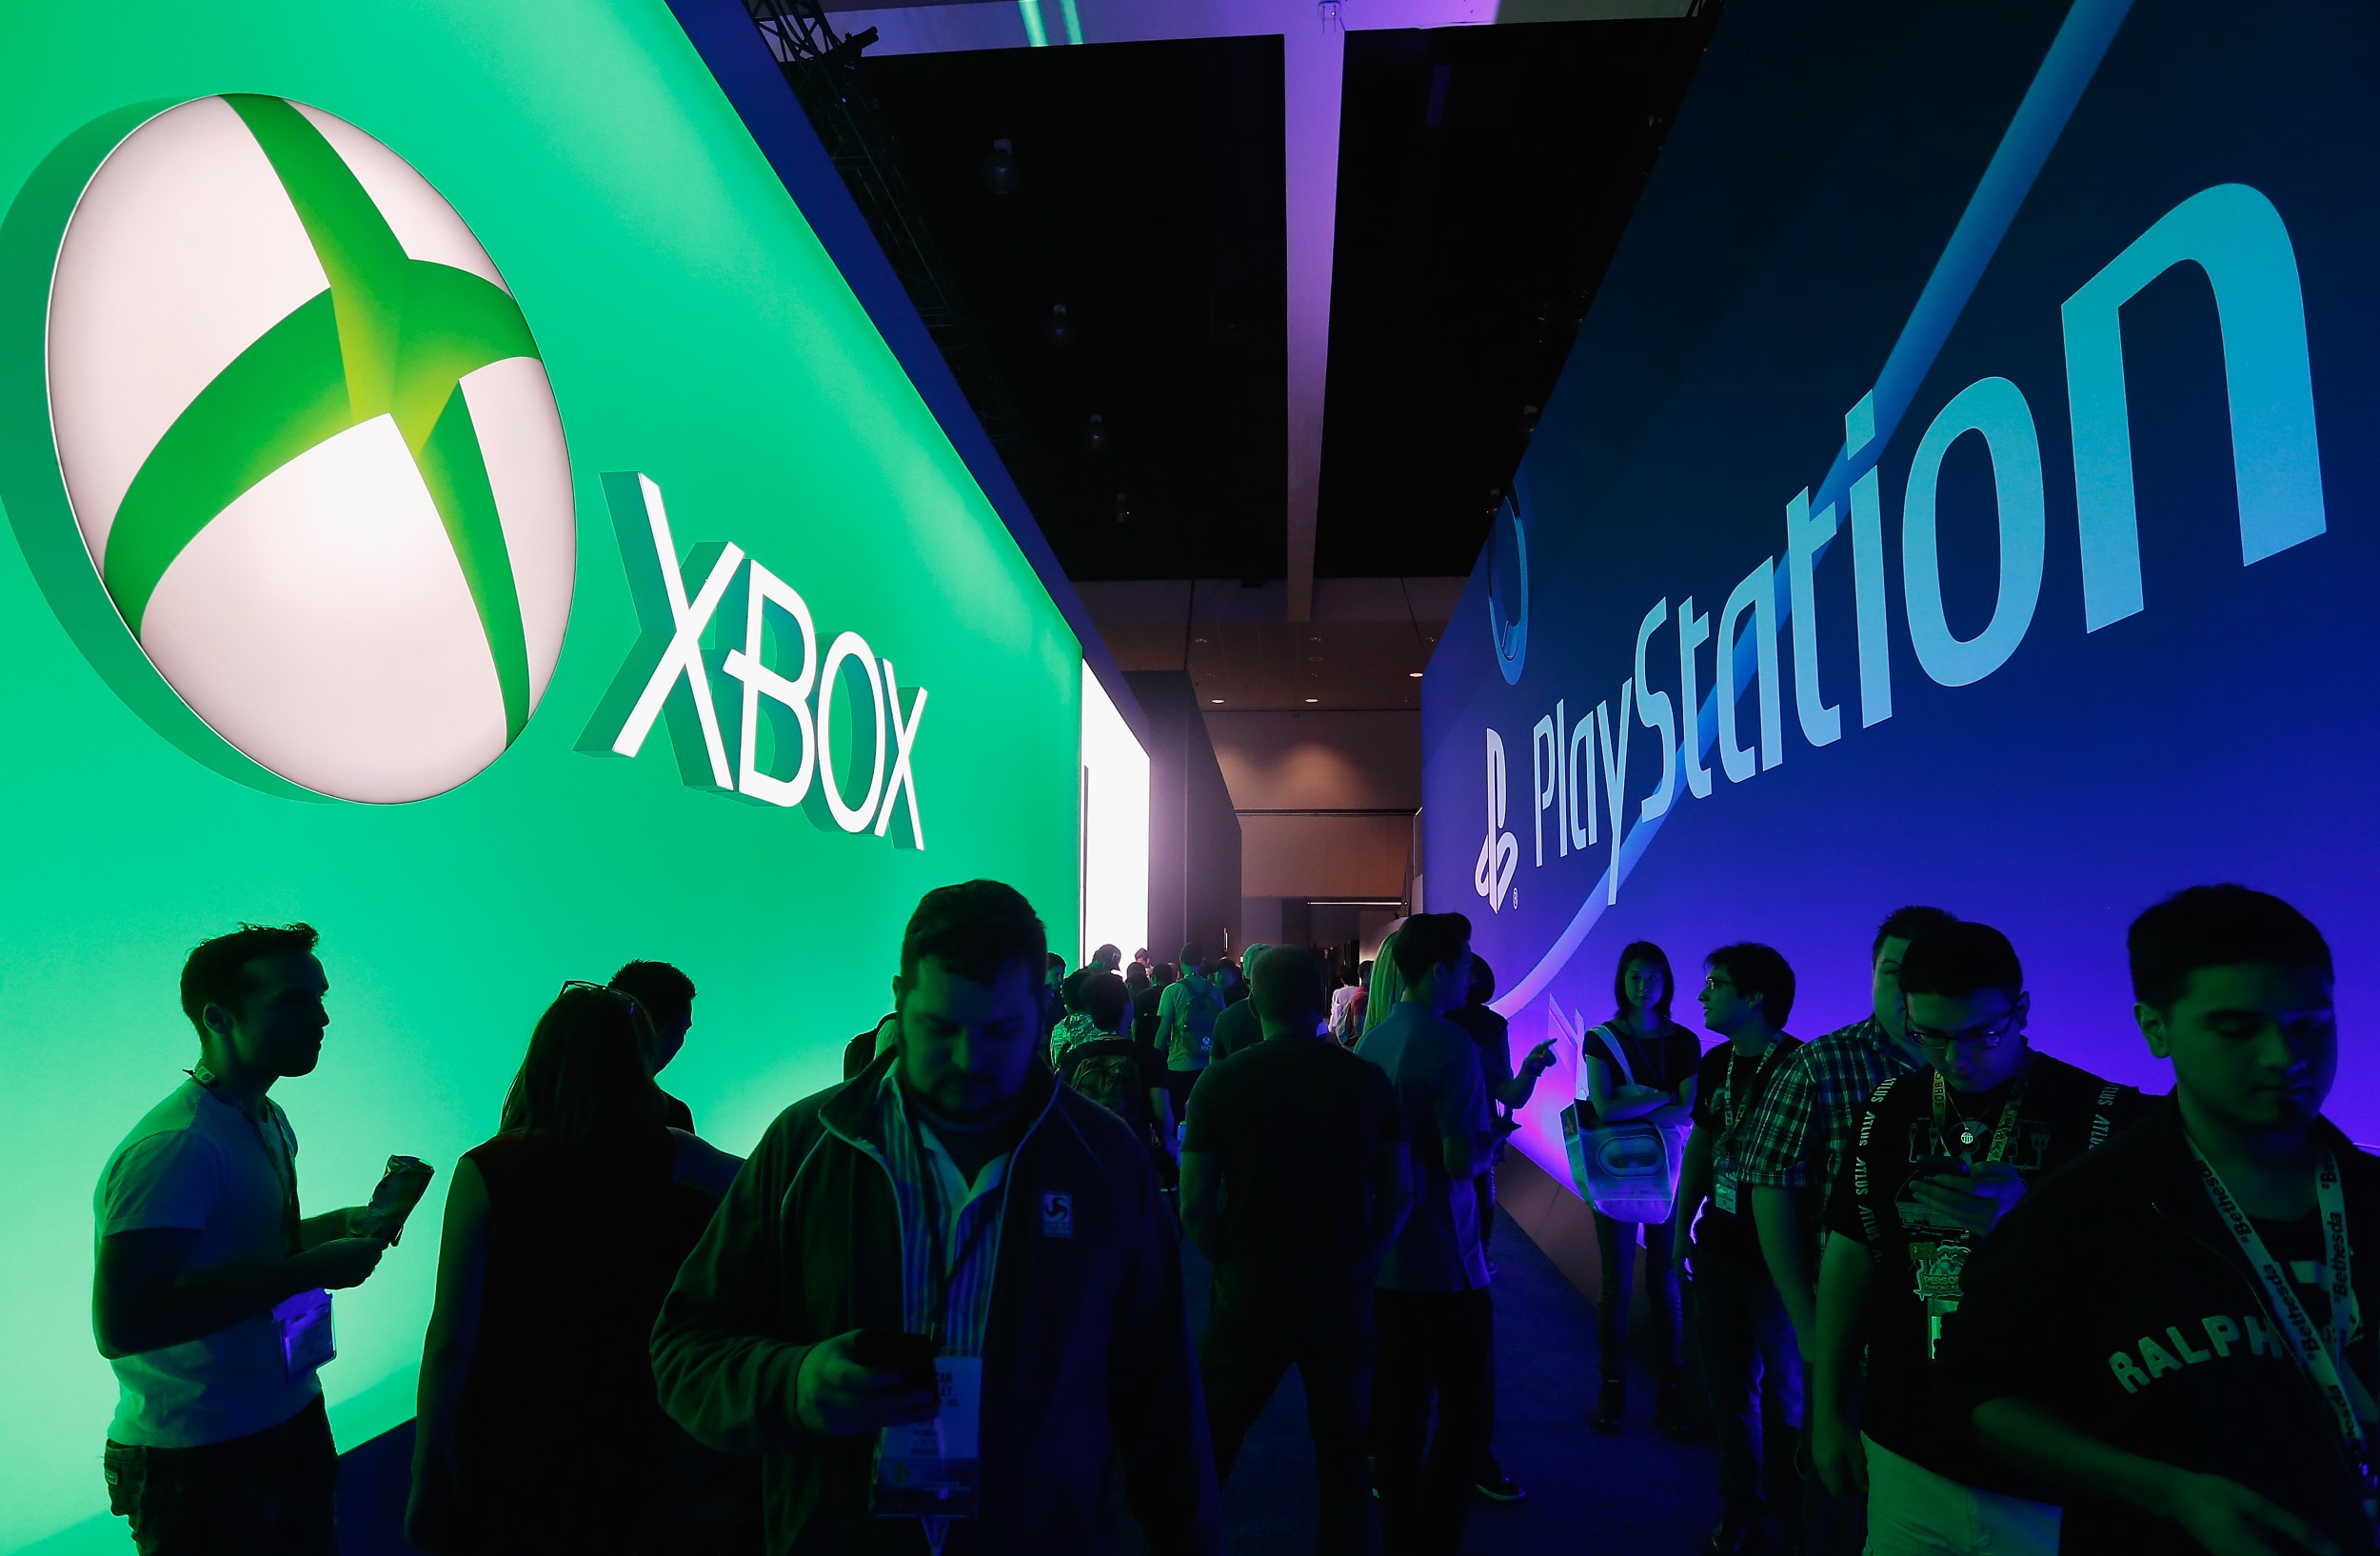 Rivals in gaming, Microsoft and Sony team up on cloud services | TechCrunch